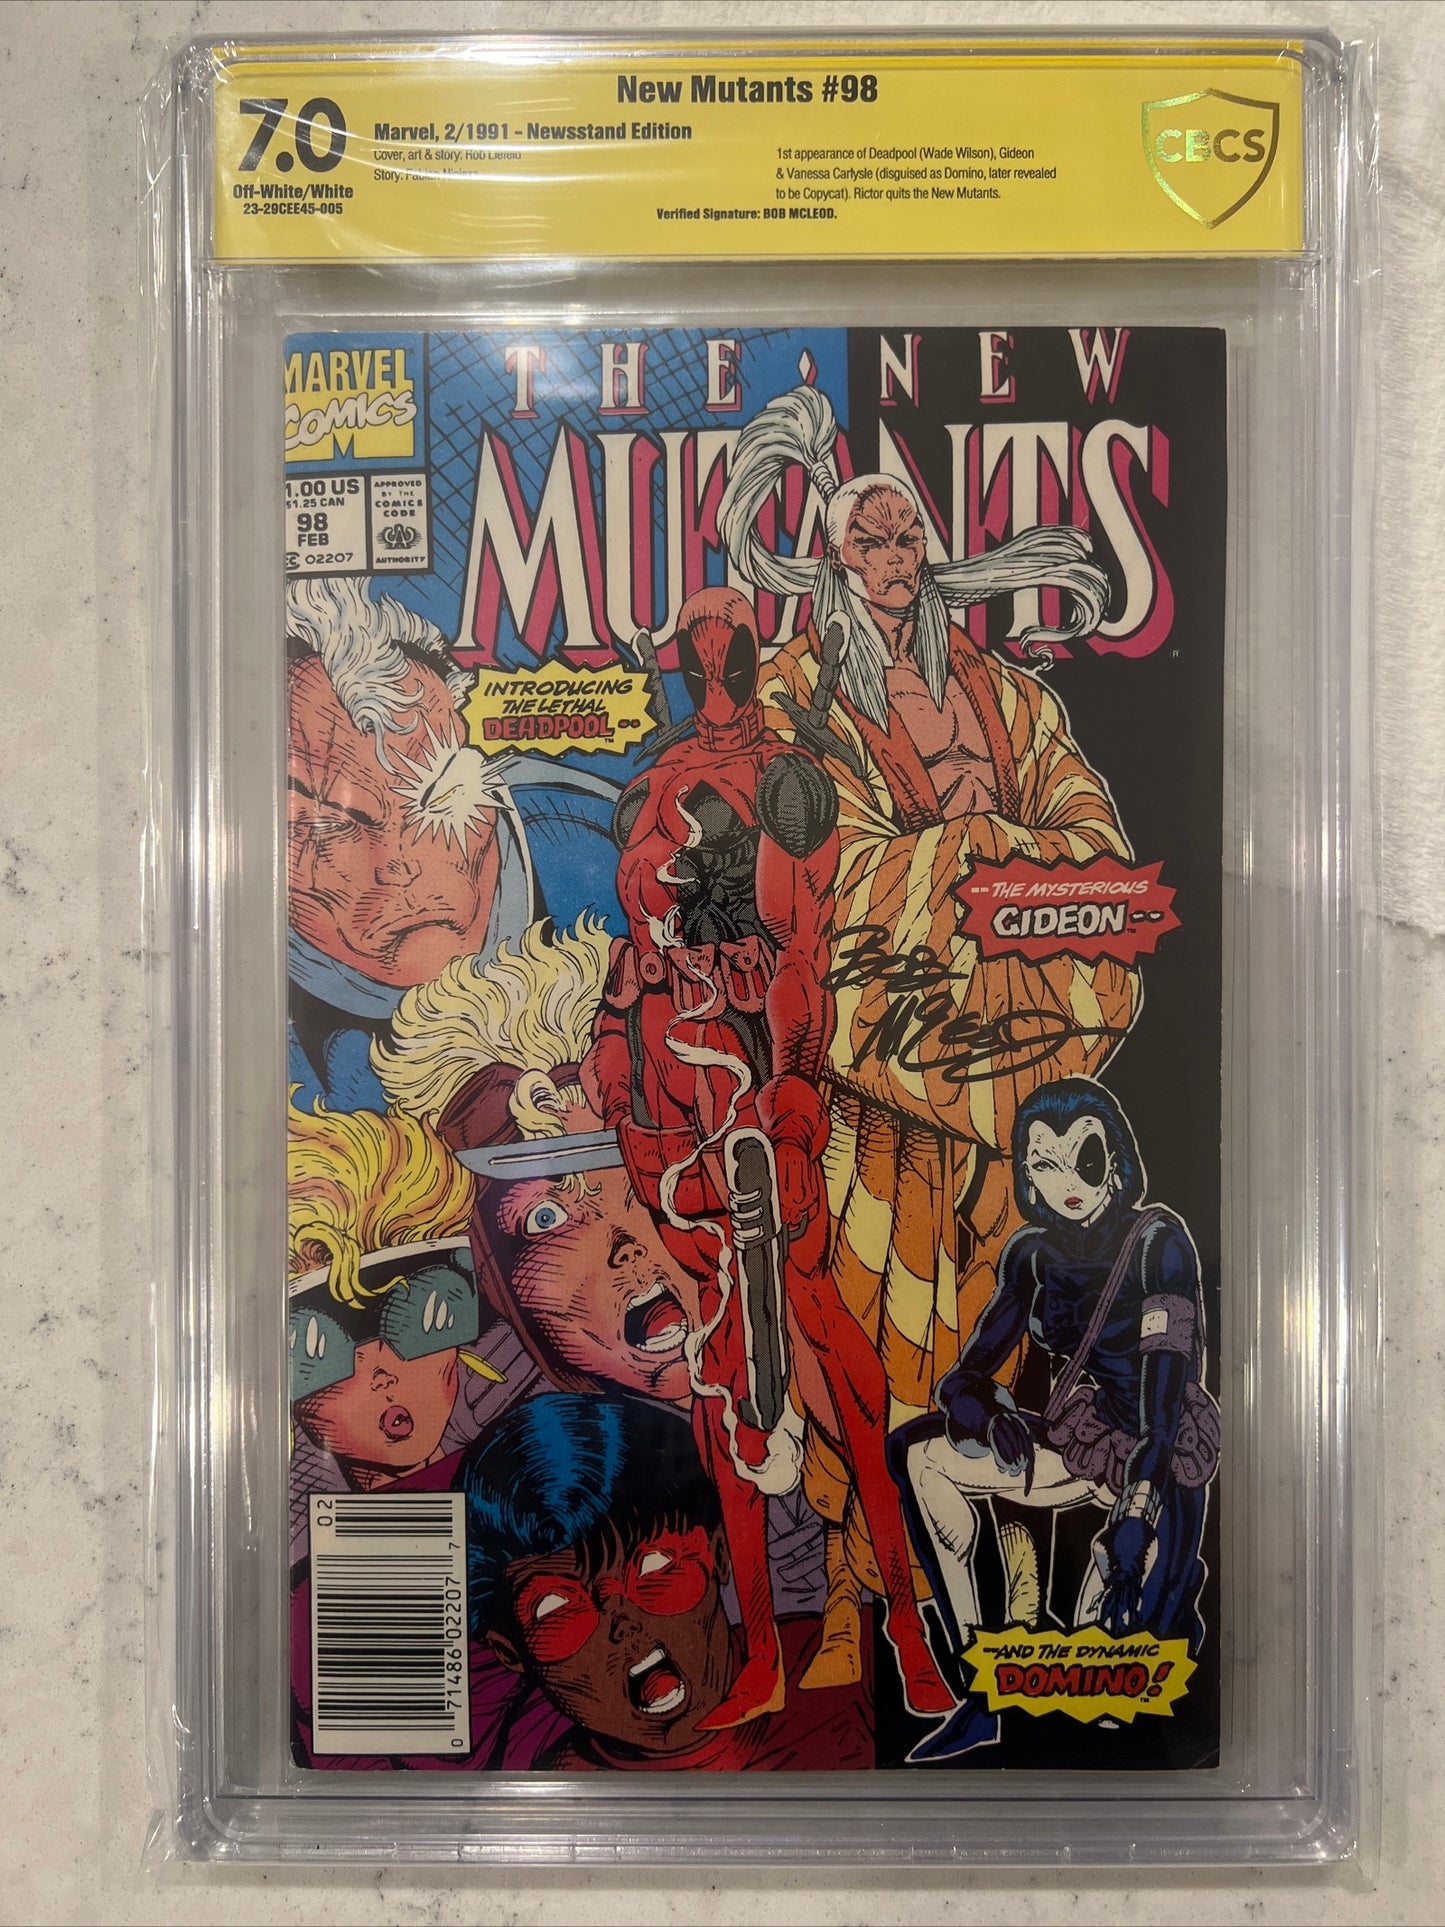 New Mutants #98 CBCS 7.0 Newsstand Edition Signed by Bob McLeod